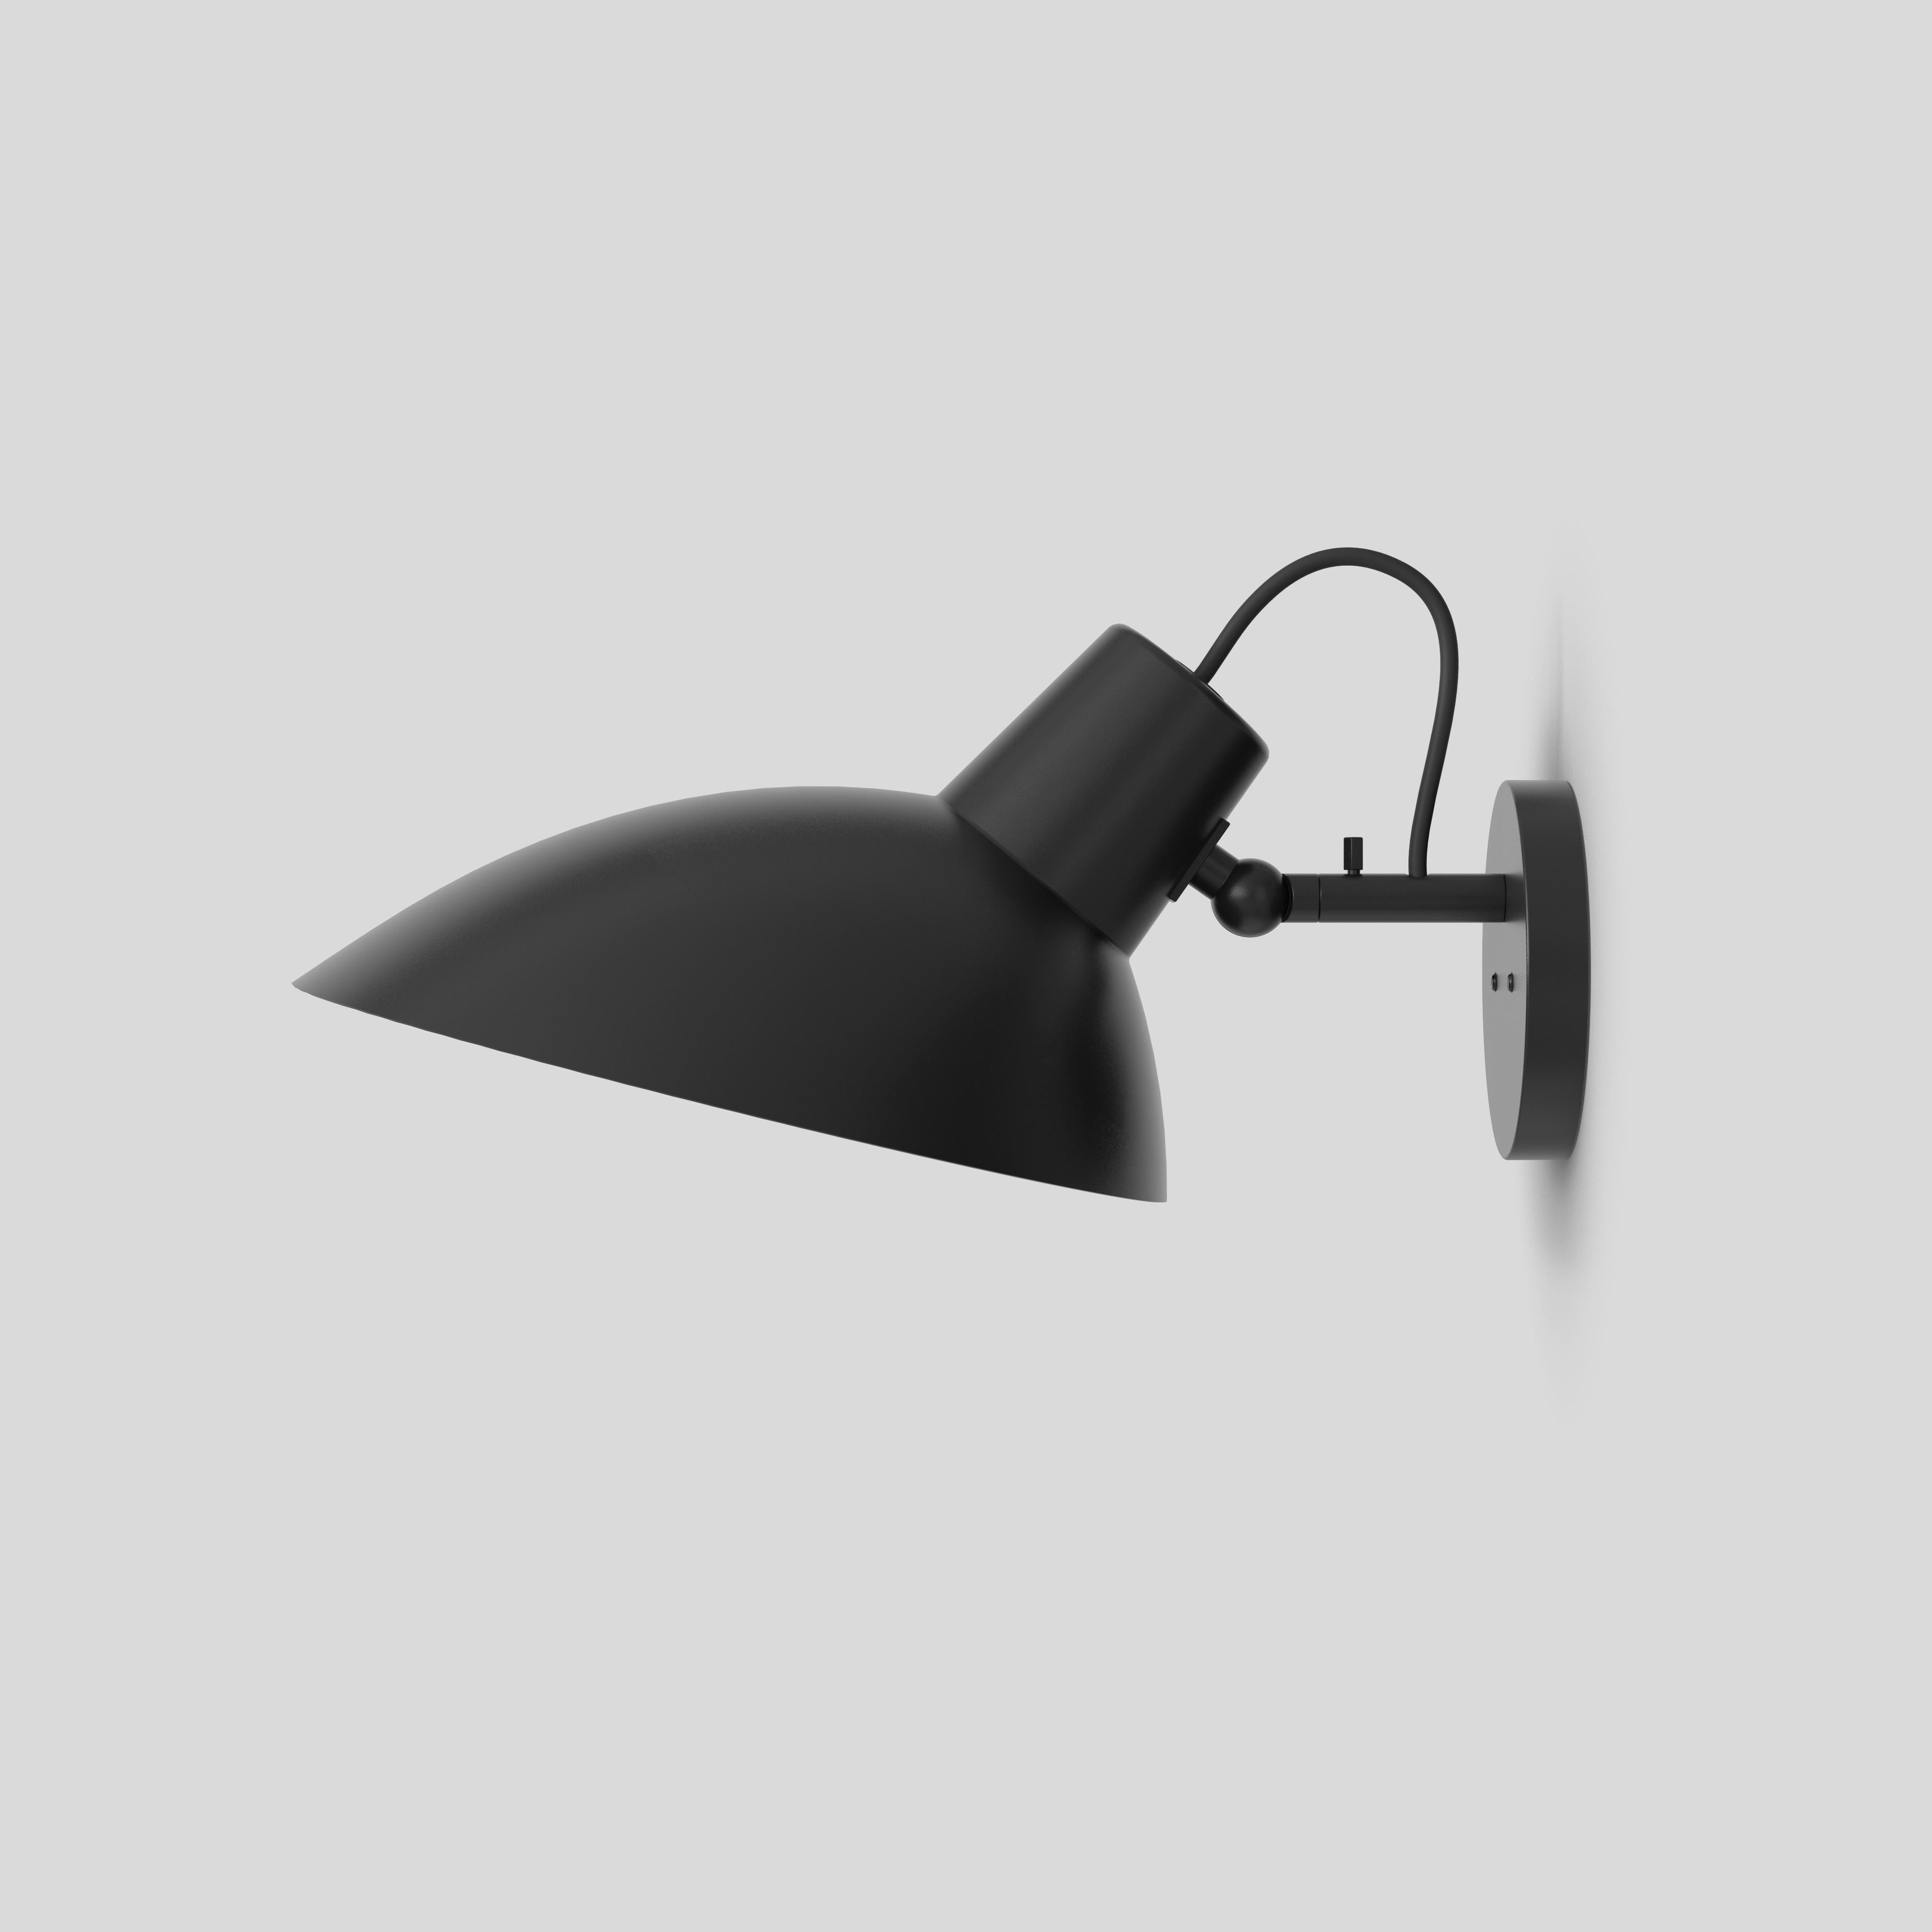 VV Cinquanta wall lamp
Design by Vittoriano Viganò
This version is with black lacquered reflector and black mount.

The VV Cinquanta features an elegant and versatile posable direct light source that can swivel and tilt. The Wall model is mounted on